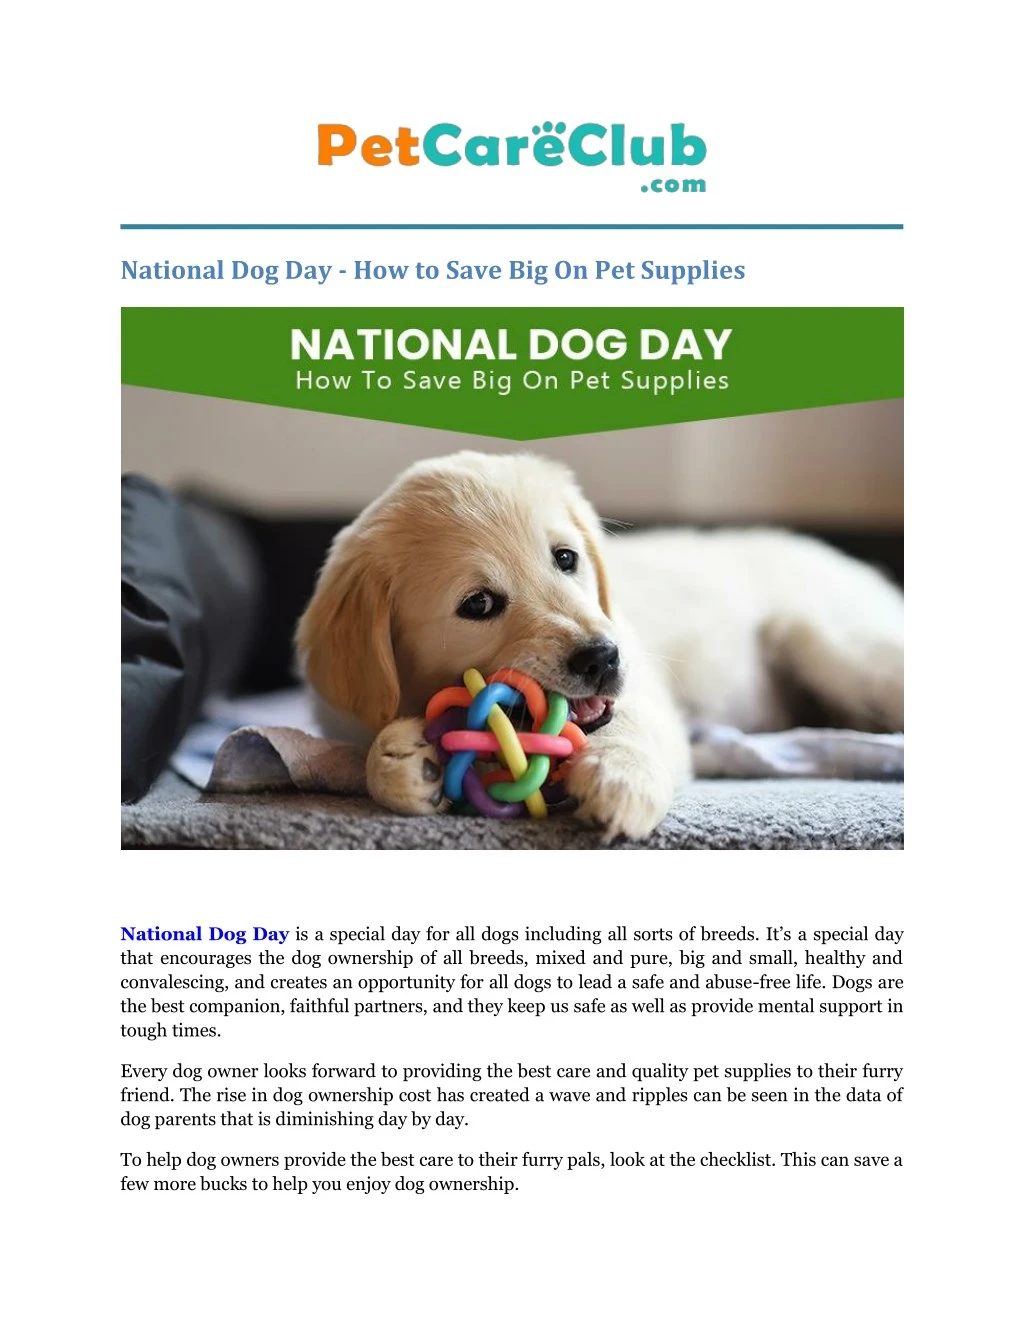 national dog day how to save big on pet supplies